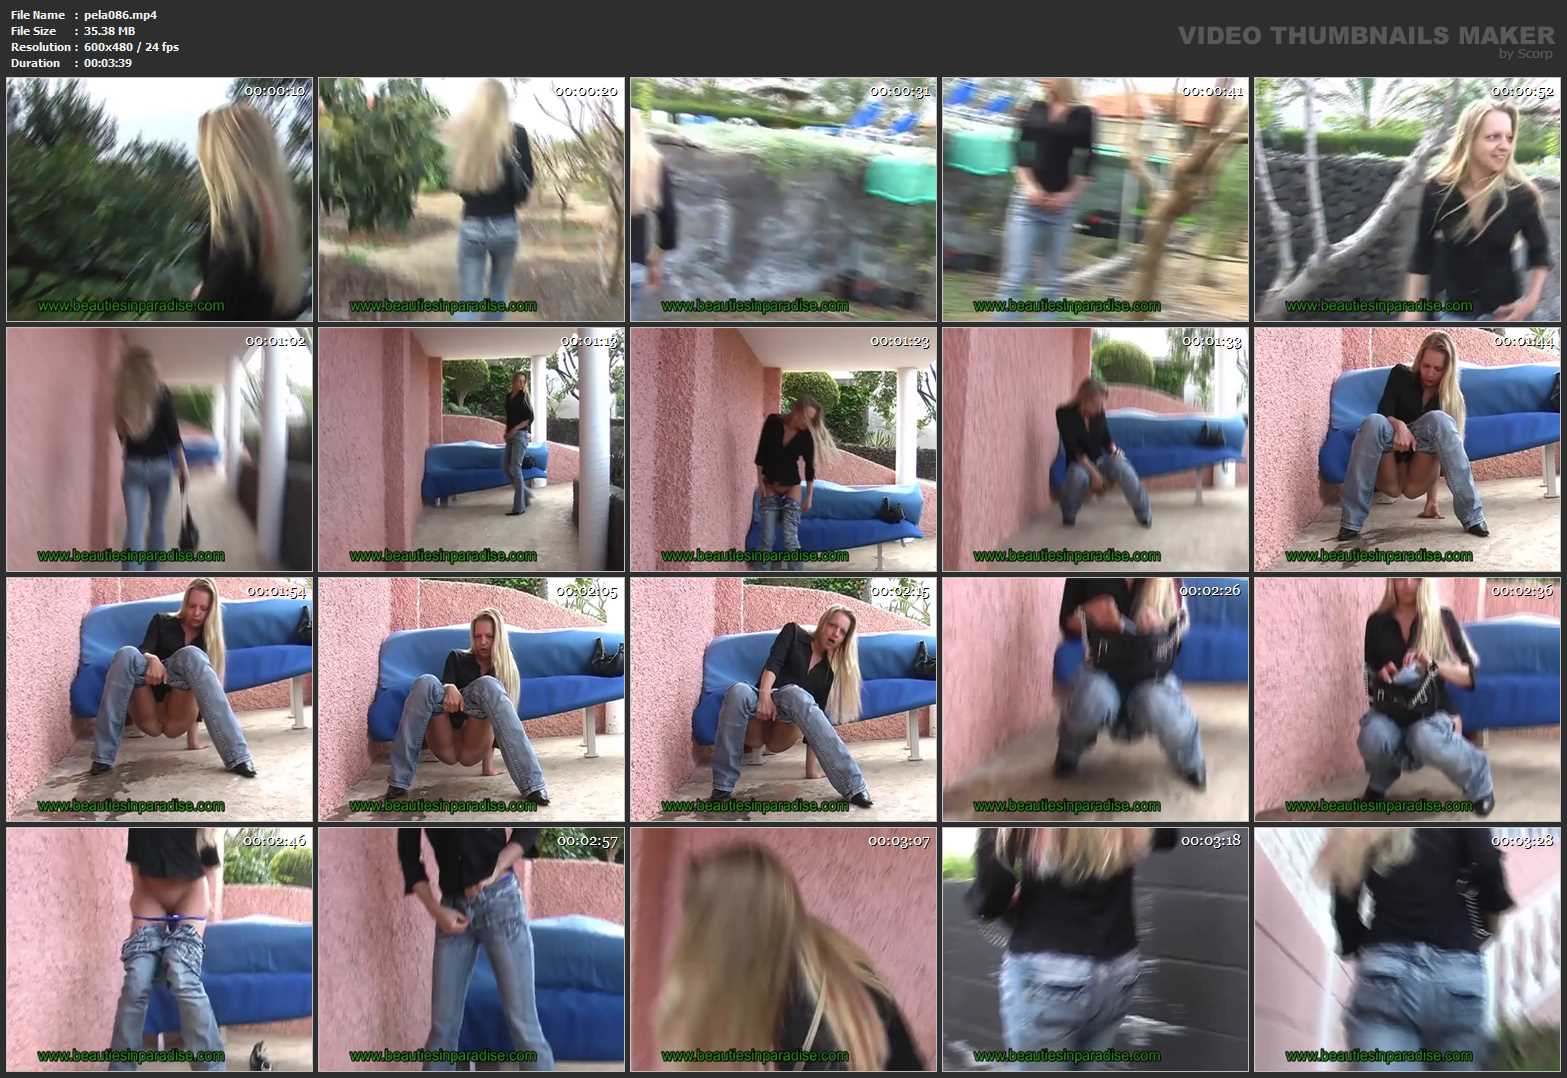 [PEEING-LADIES] Pissing After Meals [SD][480p][MP4]